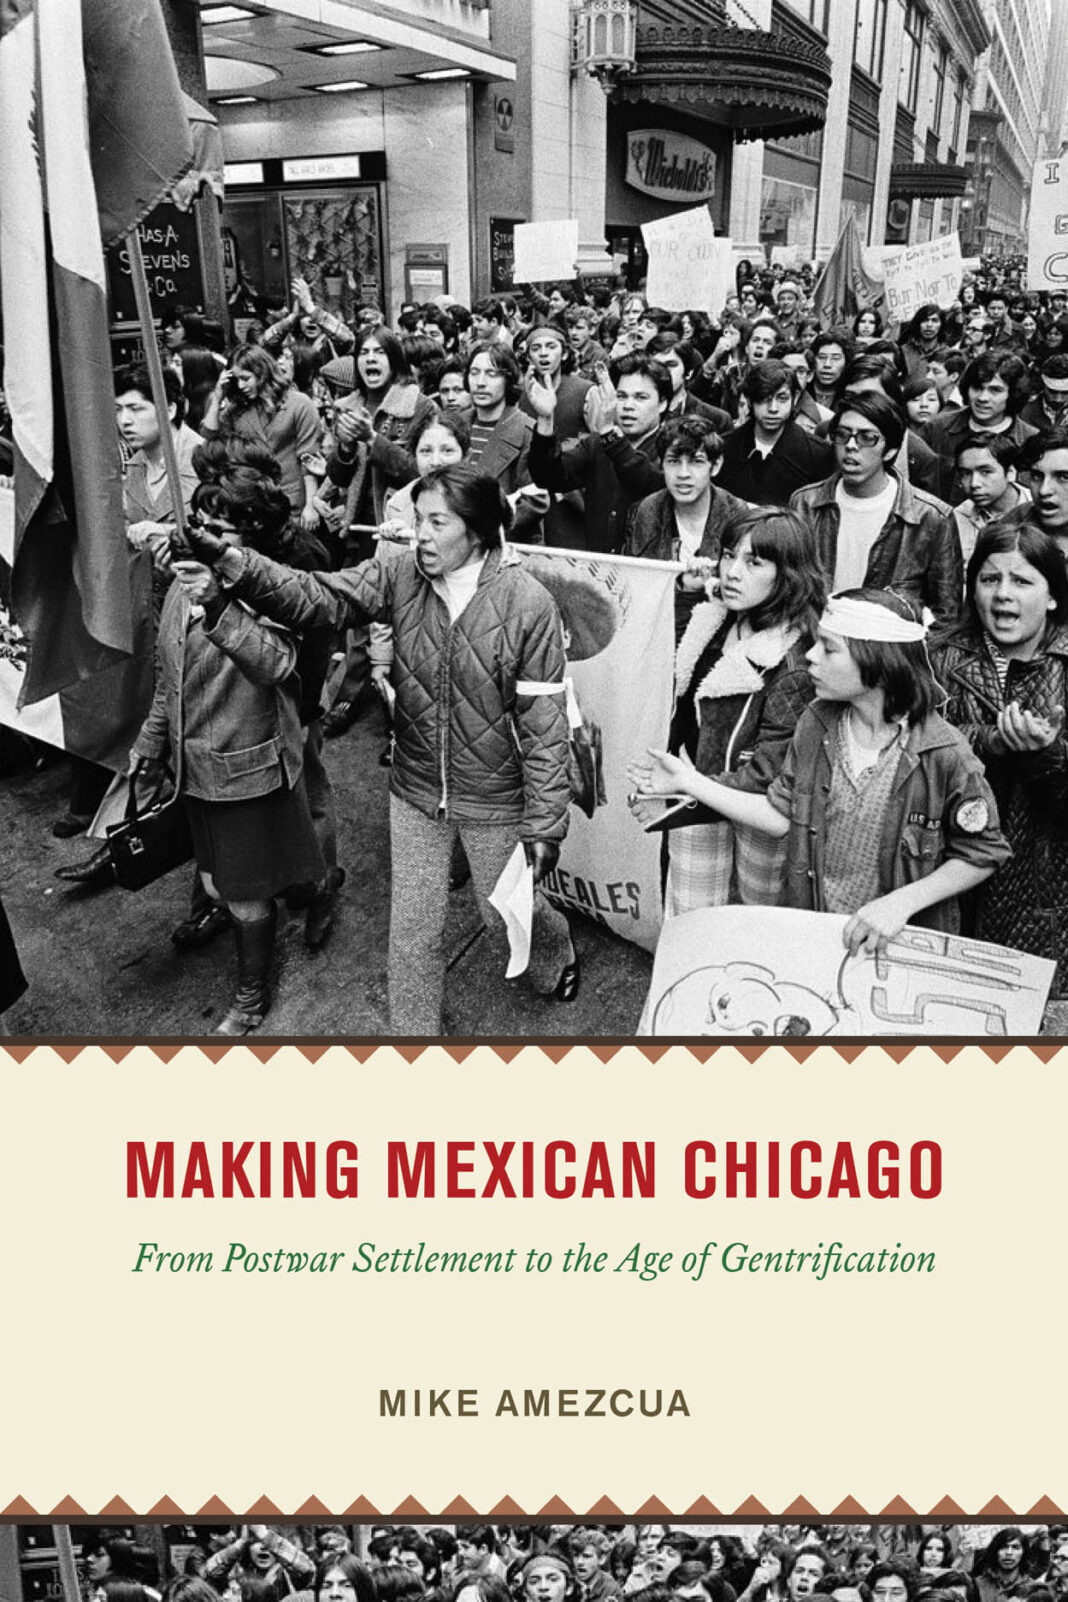 read-an-excerpt-from-“making-mexican-chicago”-by-mike-amezcua